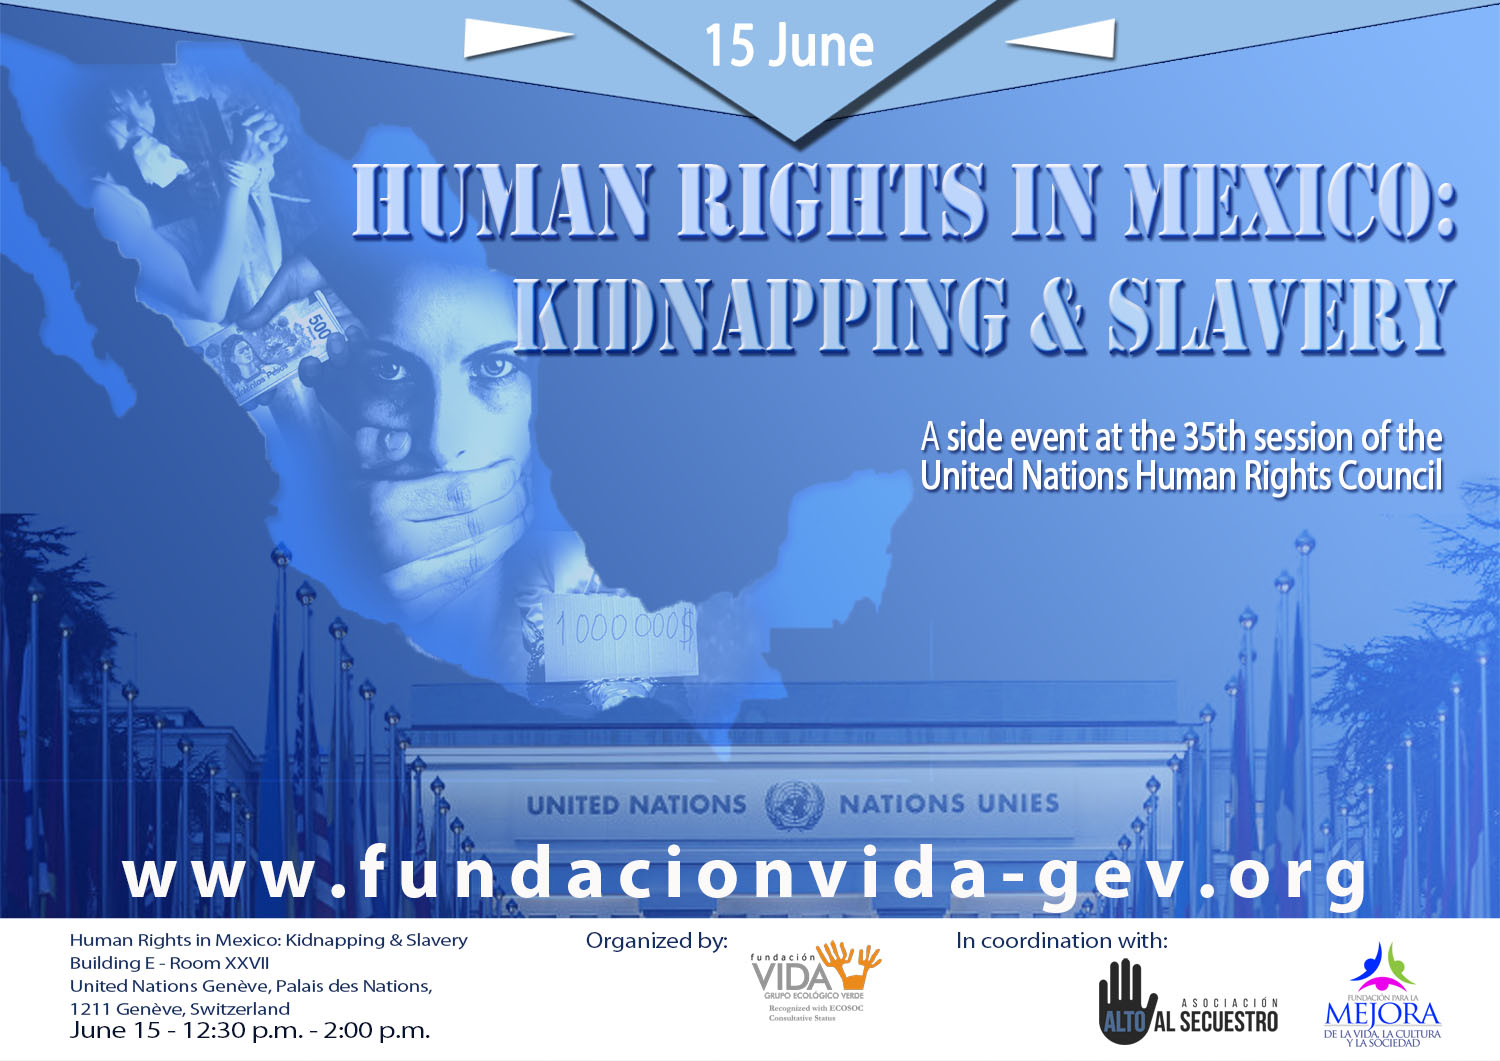 kidnapping, sla ery, mexico, united nations